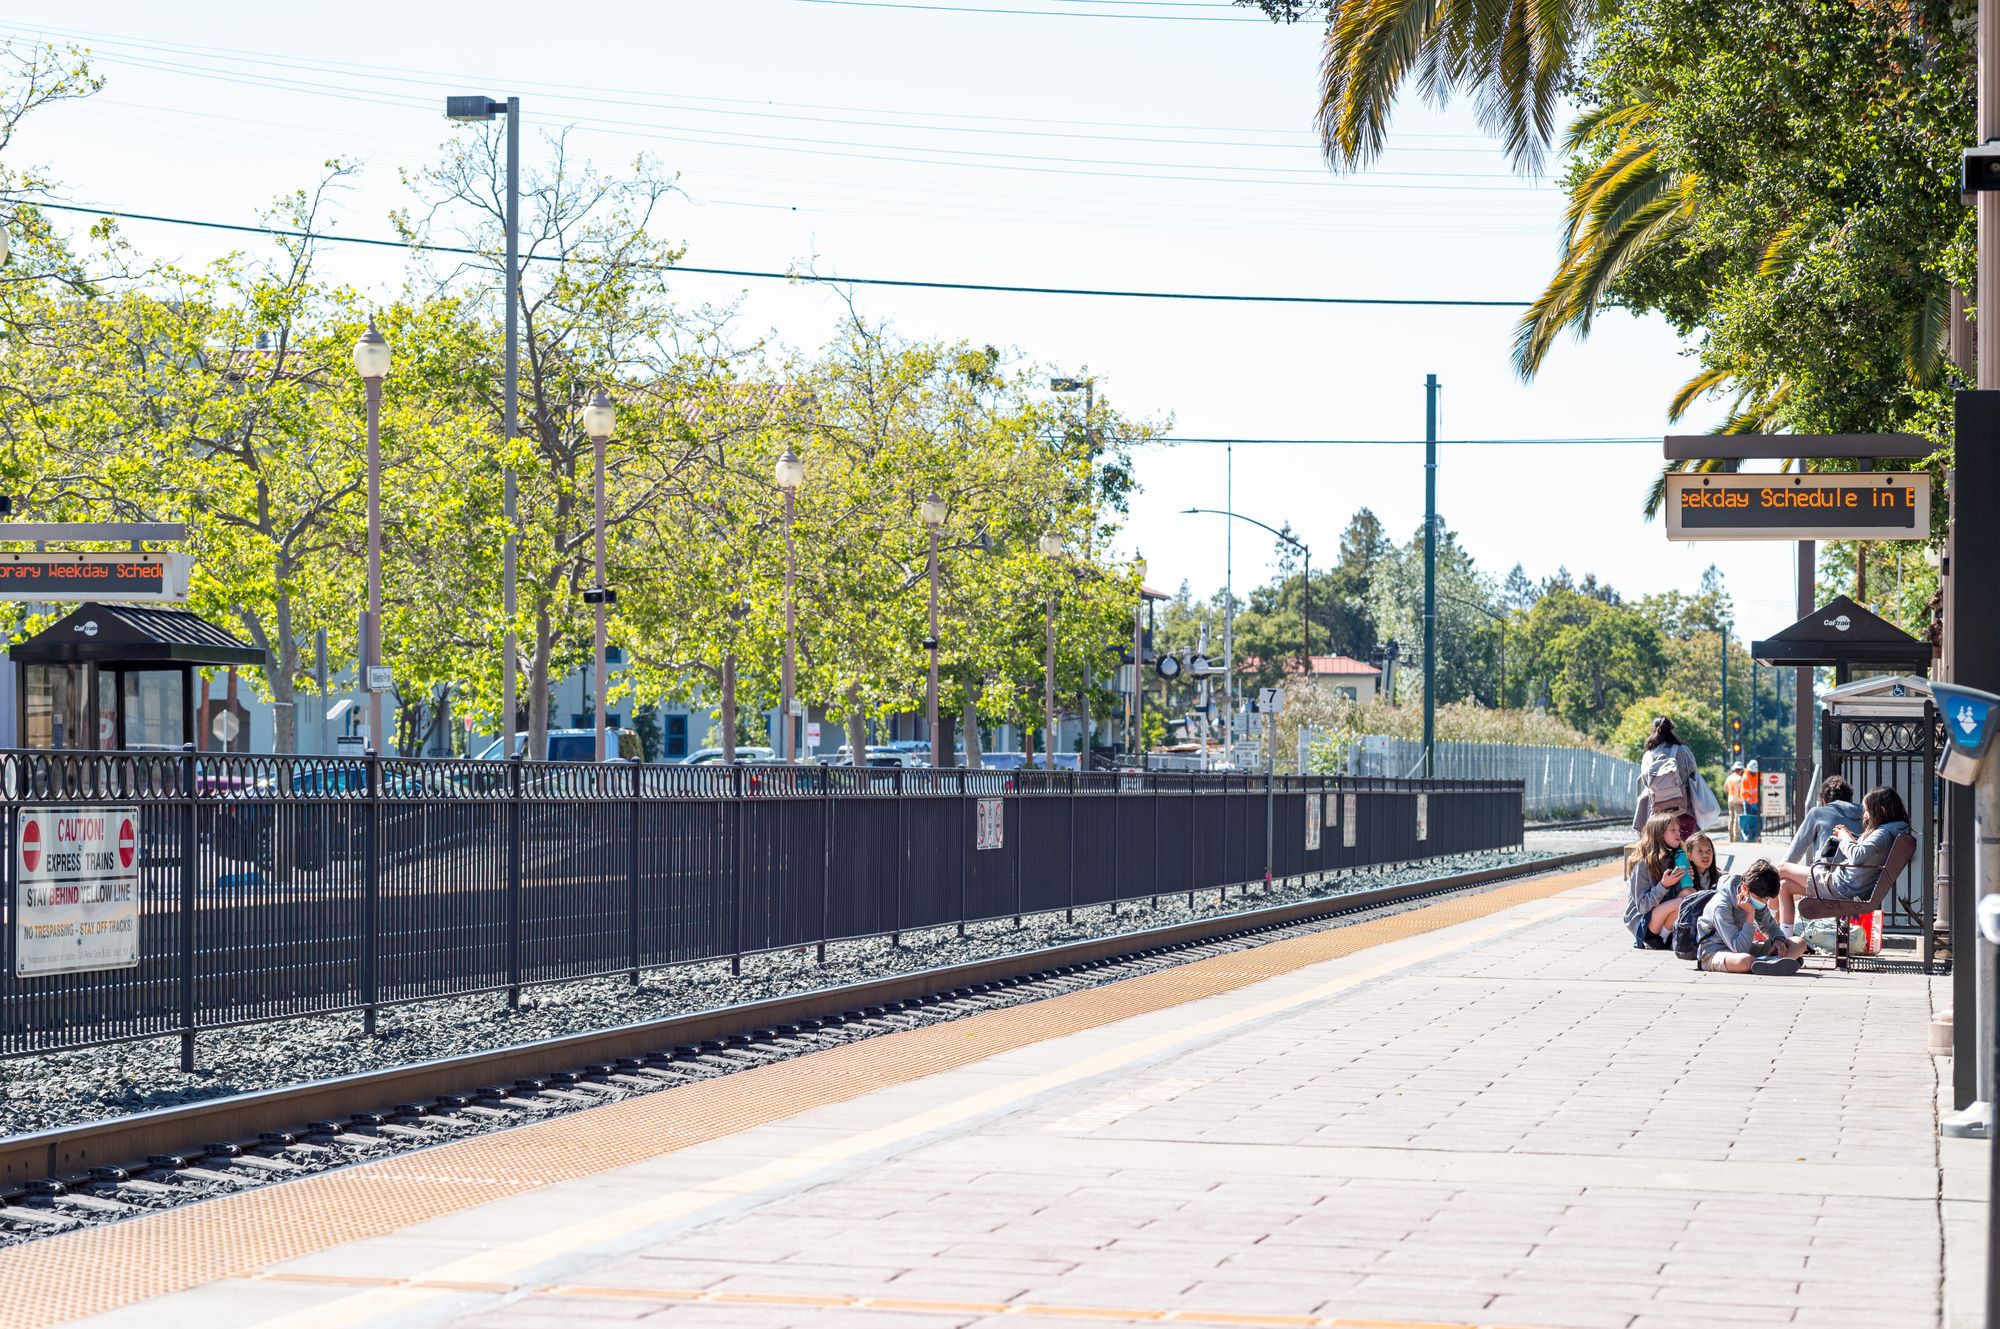 Taking the SamTrans Route 296 to Menlo Park Caltrain